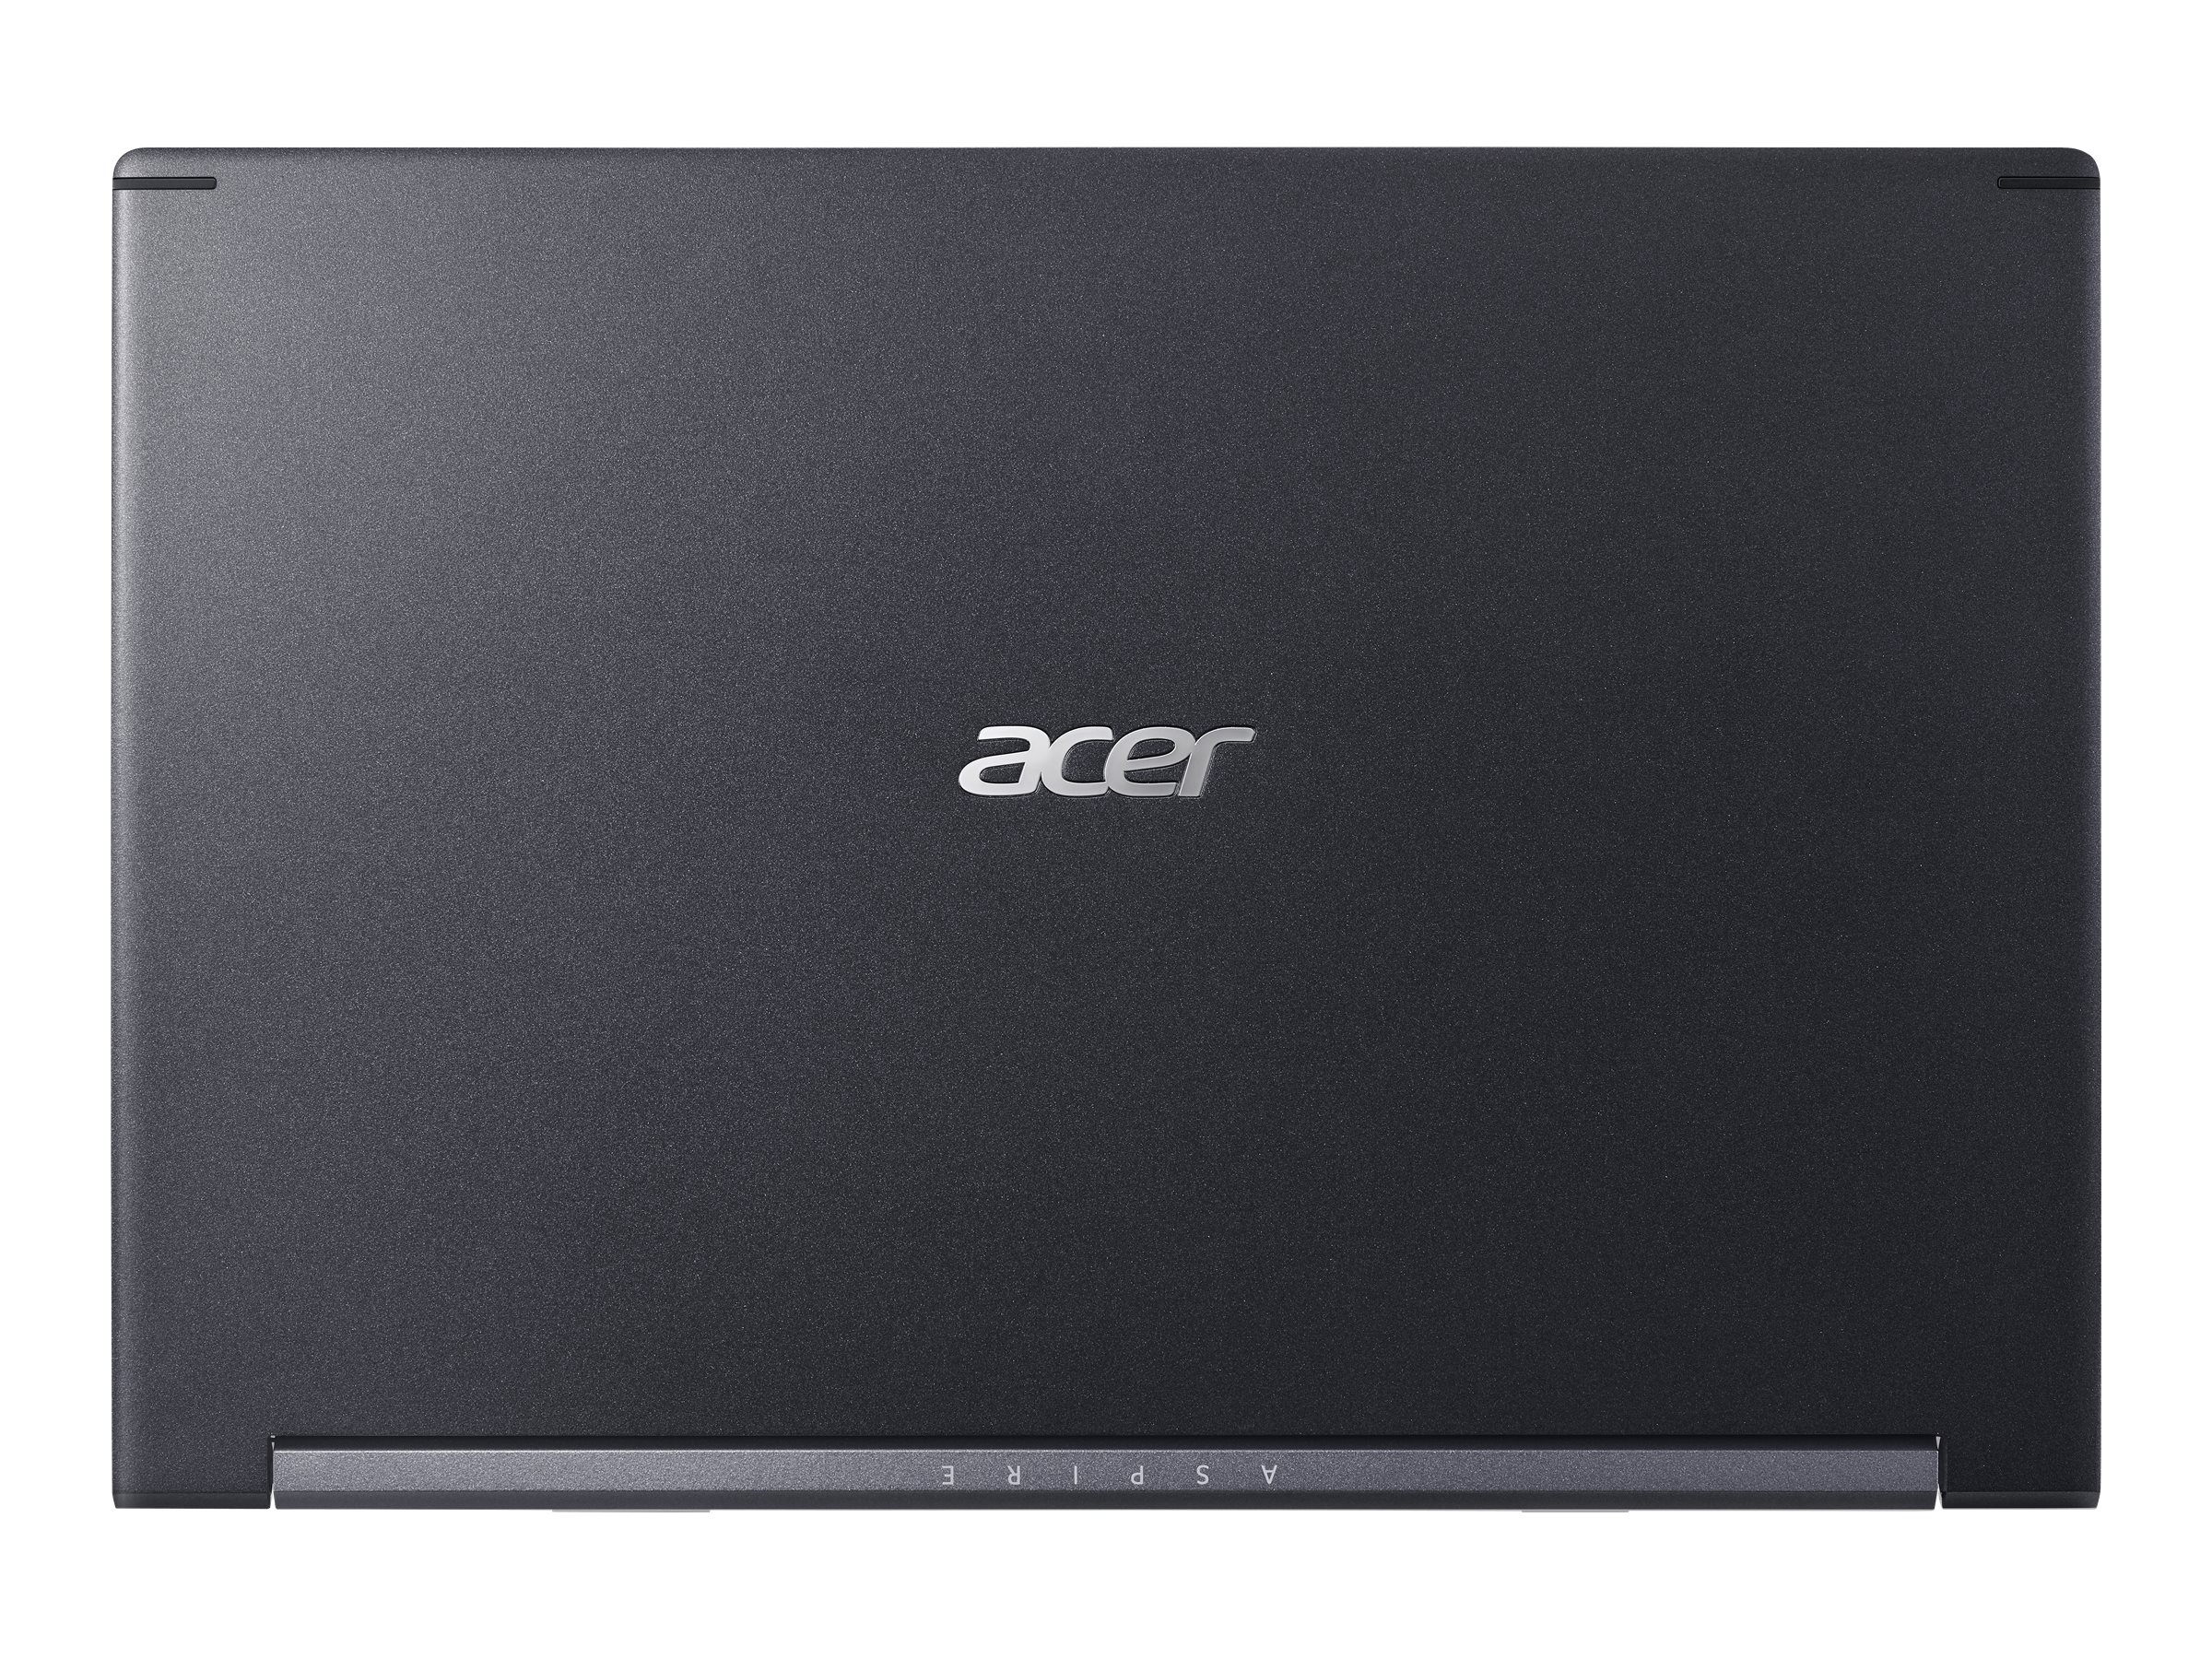 Acer Aspire 7 15.6" Full HD Laptop, Intel Core i7 i7-9750H, 512GB SSD, Windows 10 Home, A715-74G-71WS - image 5 of 8